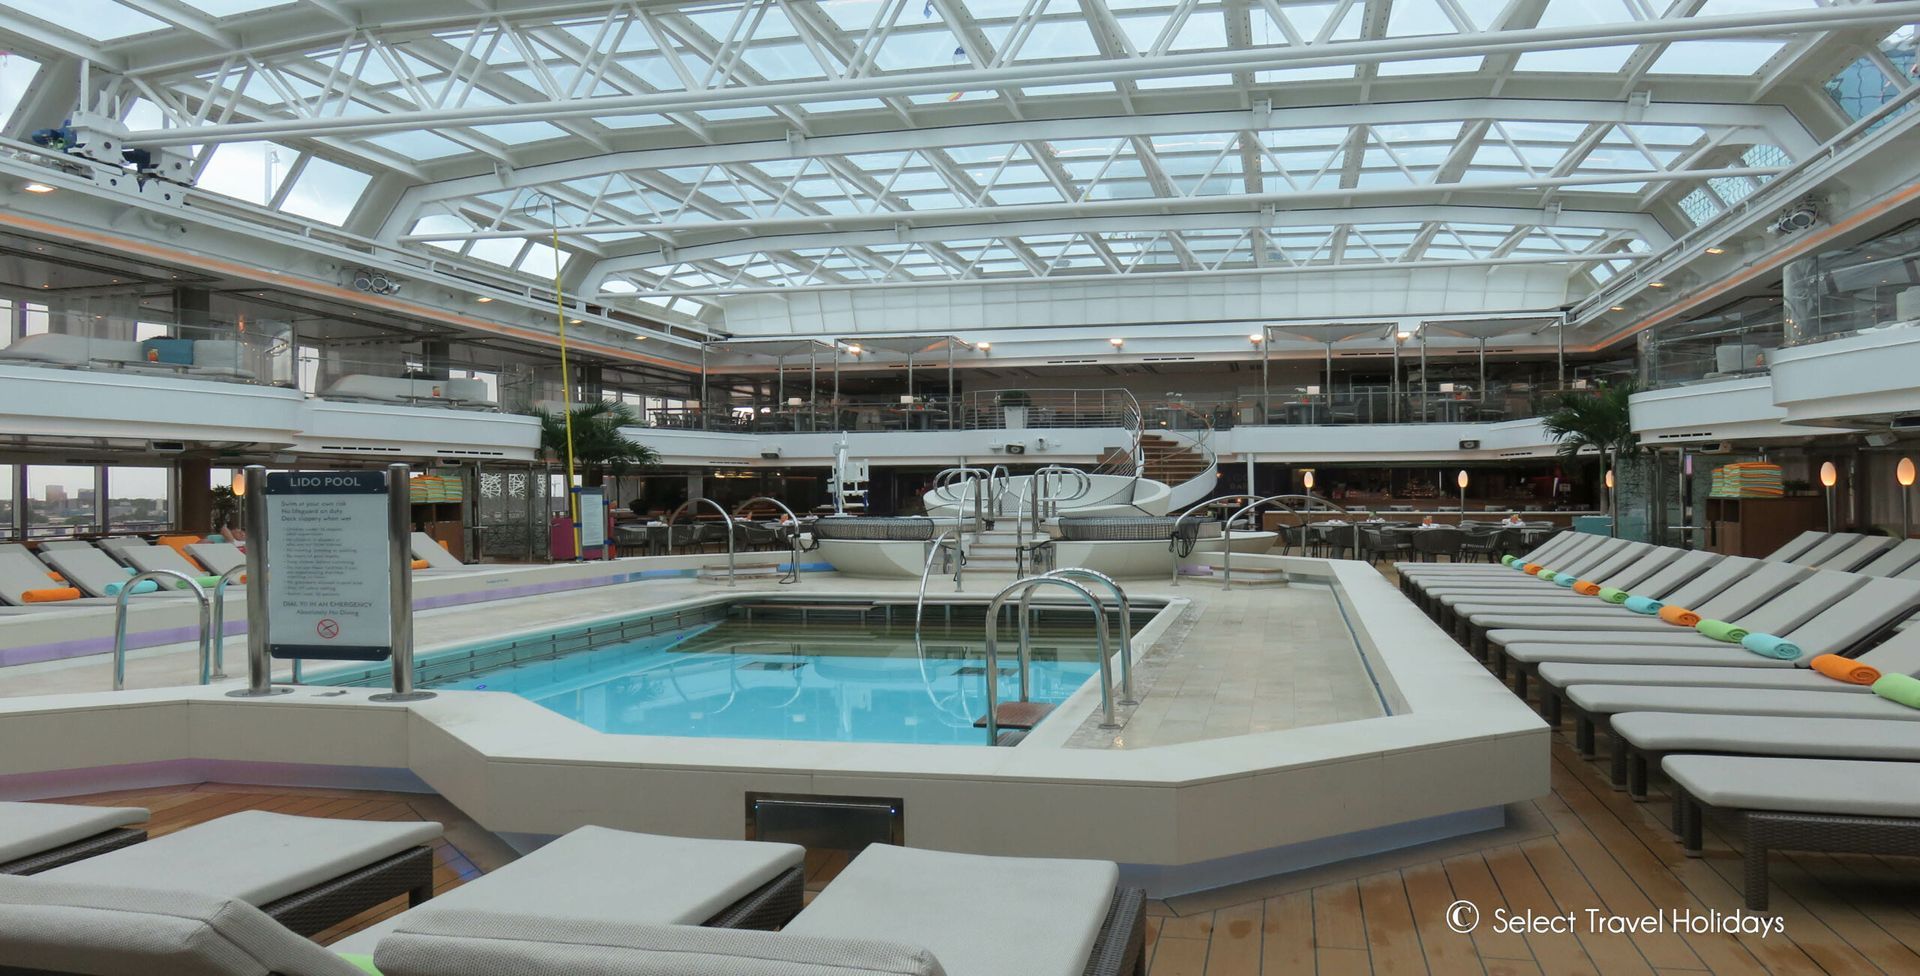 there is a large swimming pool on the deck of a cruise ship .